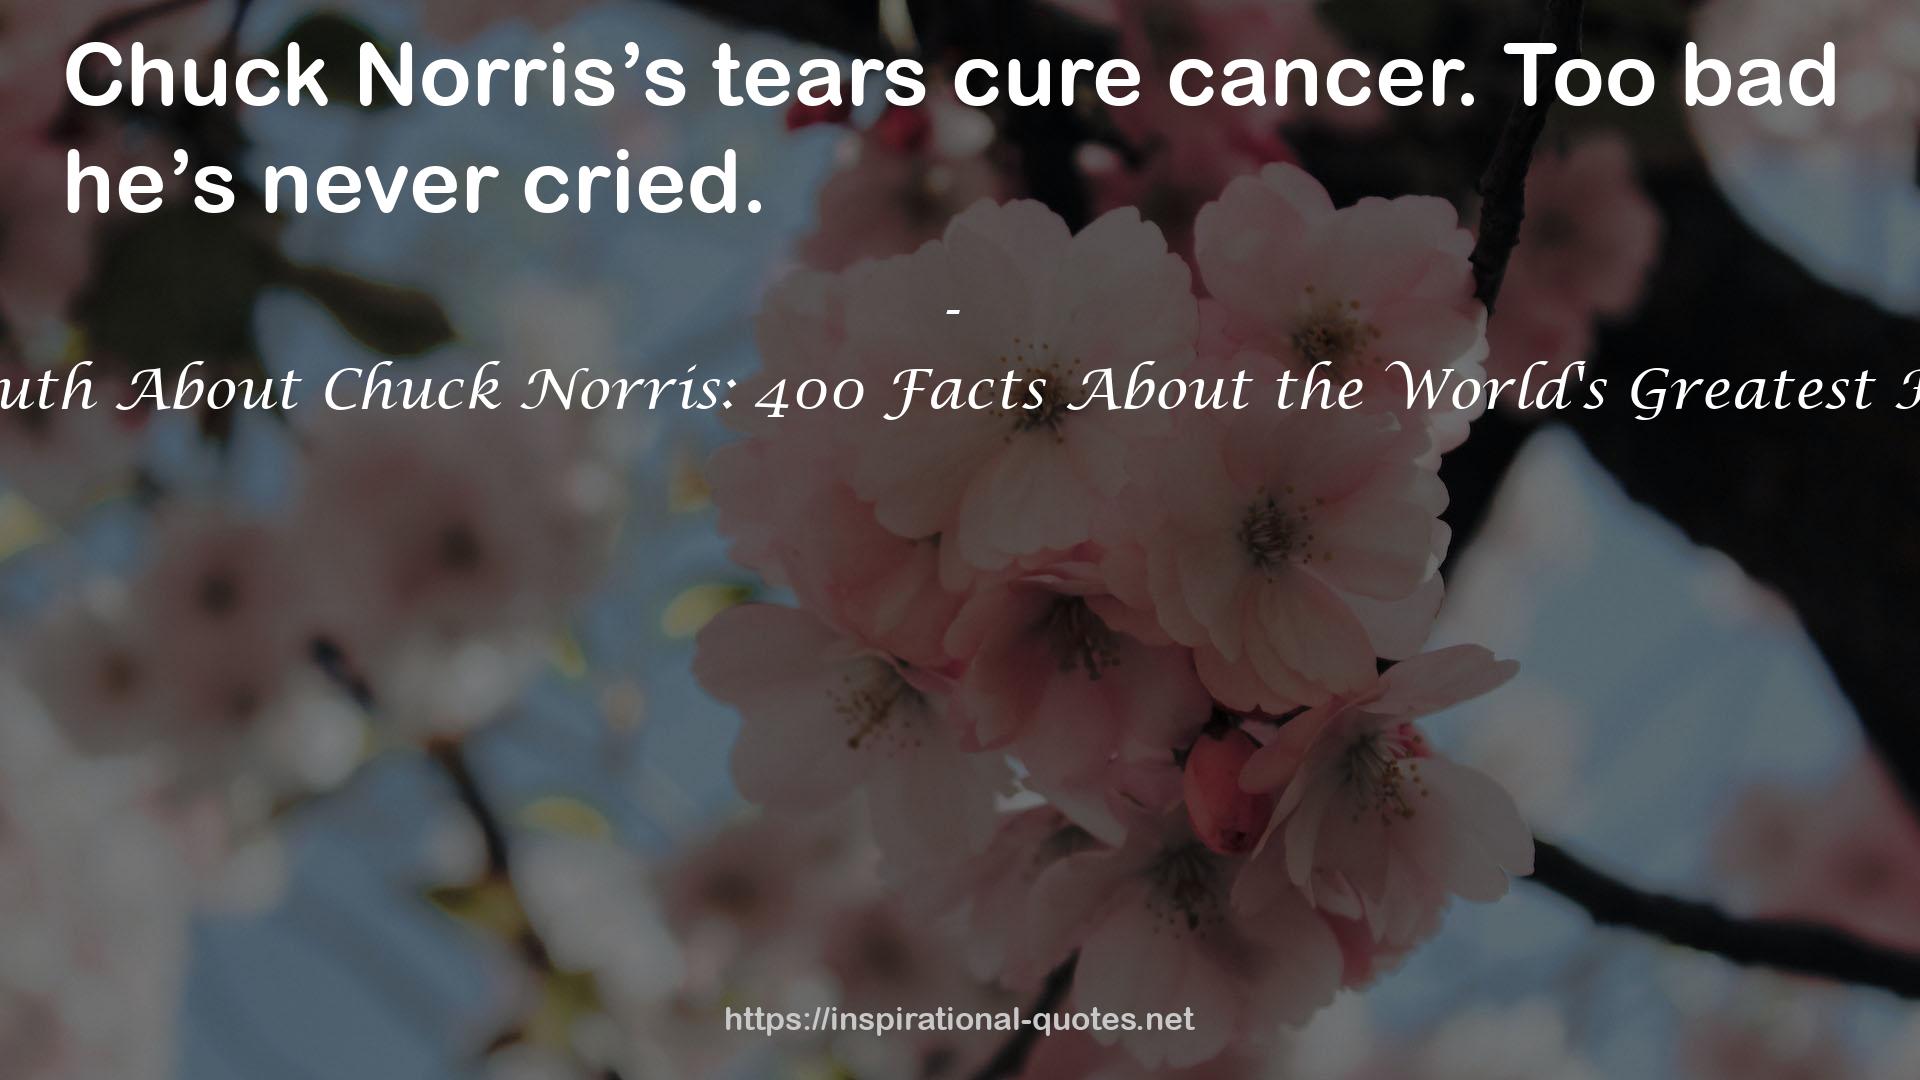 The Truth About Chuck Norris: 400 Facts About the World's Greatest Human QUOTES